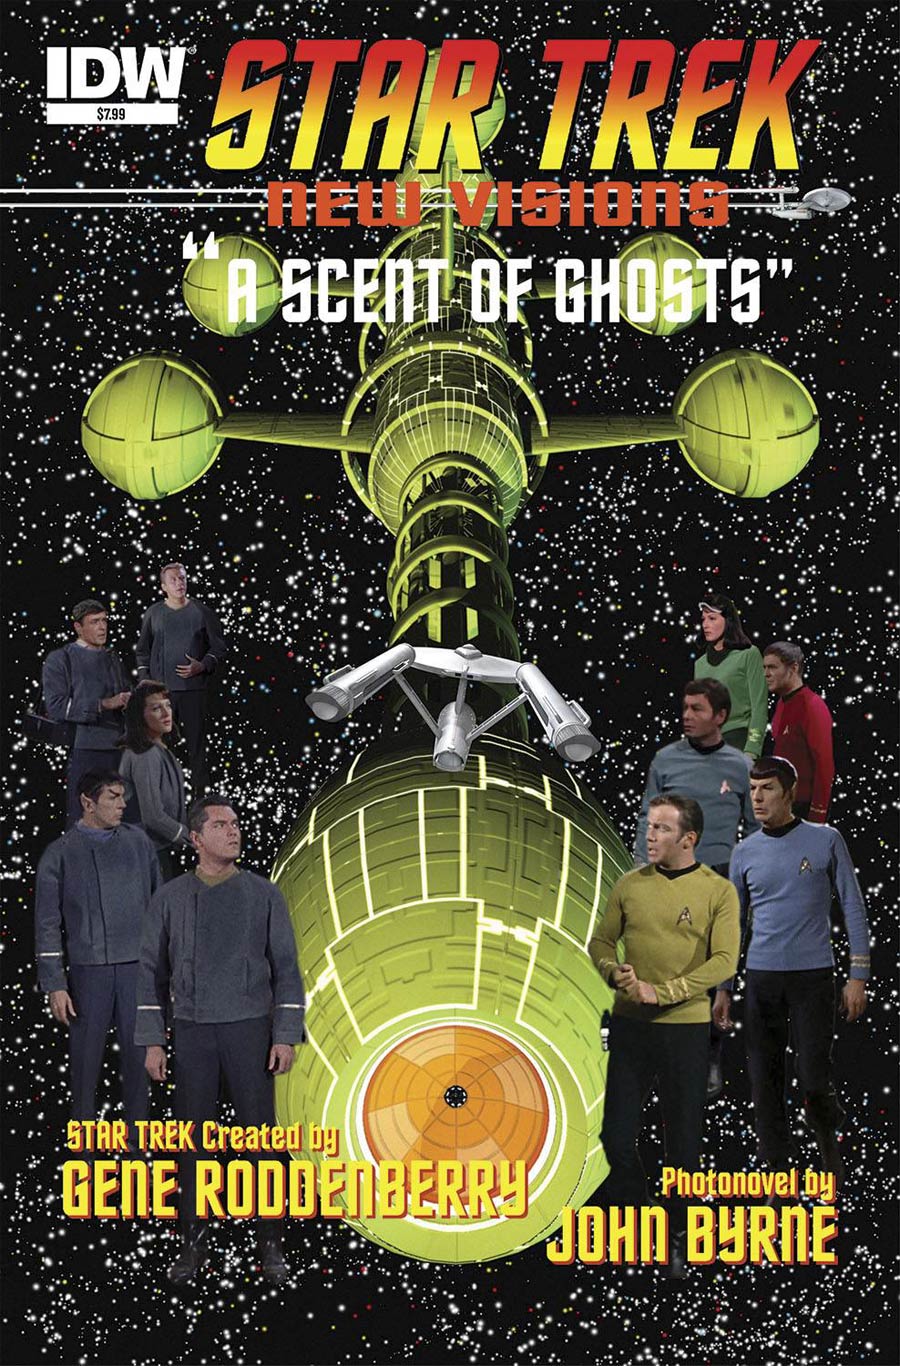 Star Trek New Visions #5 A Scent Of Ghosts